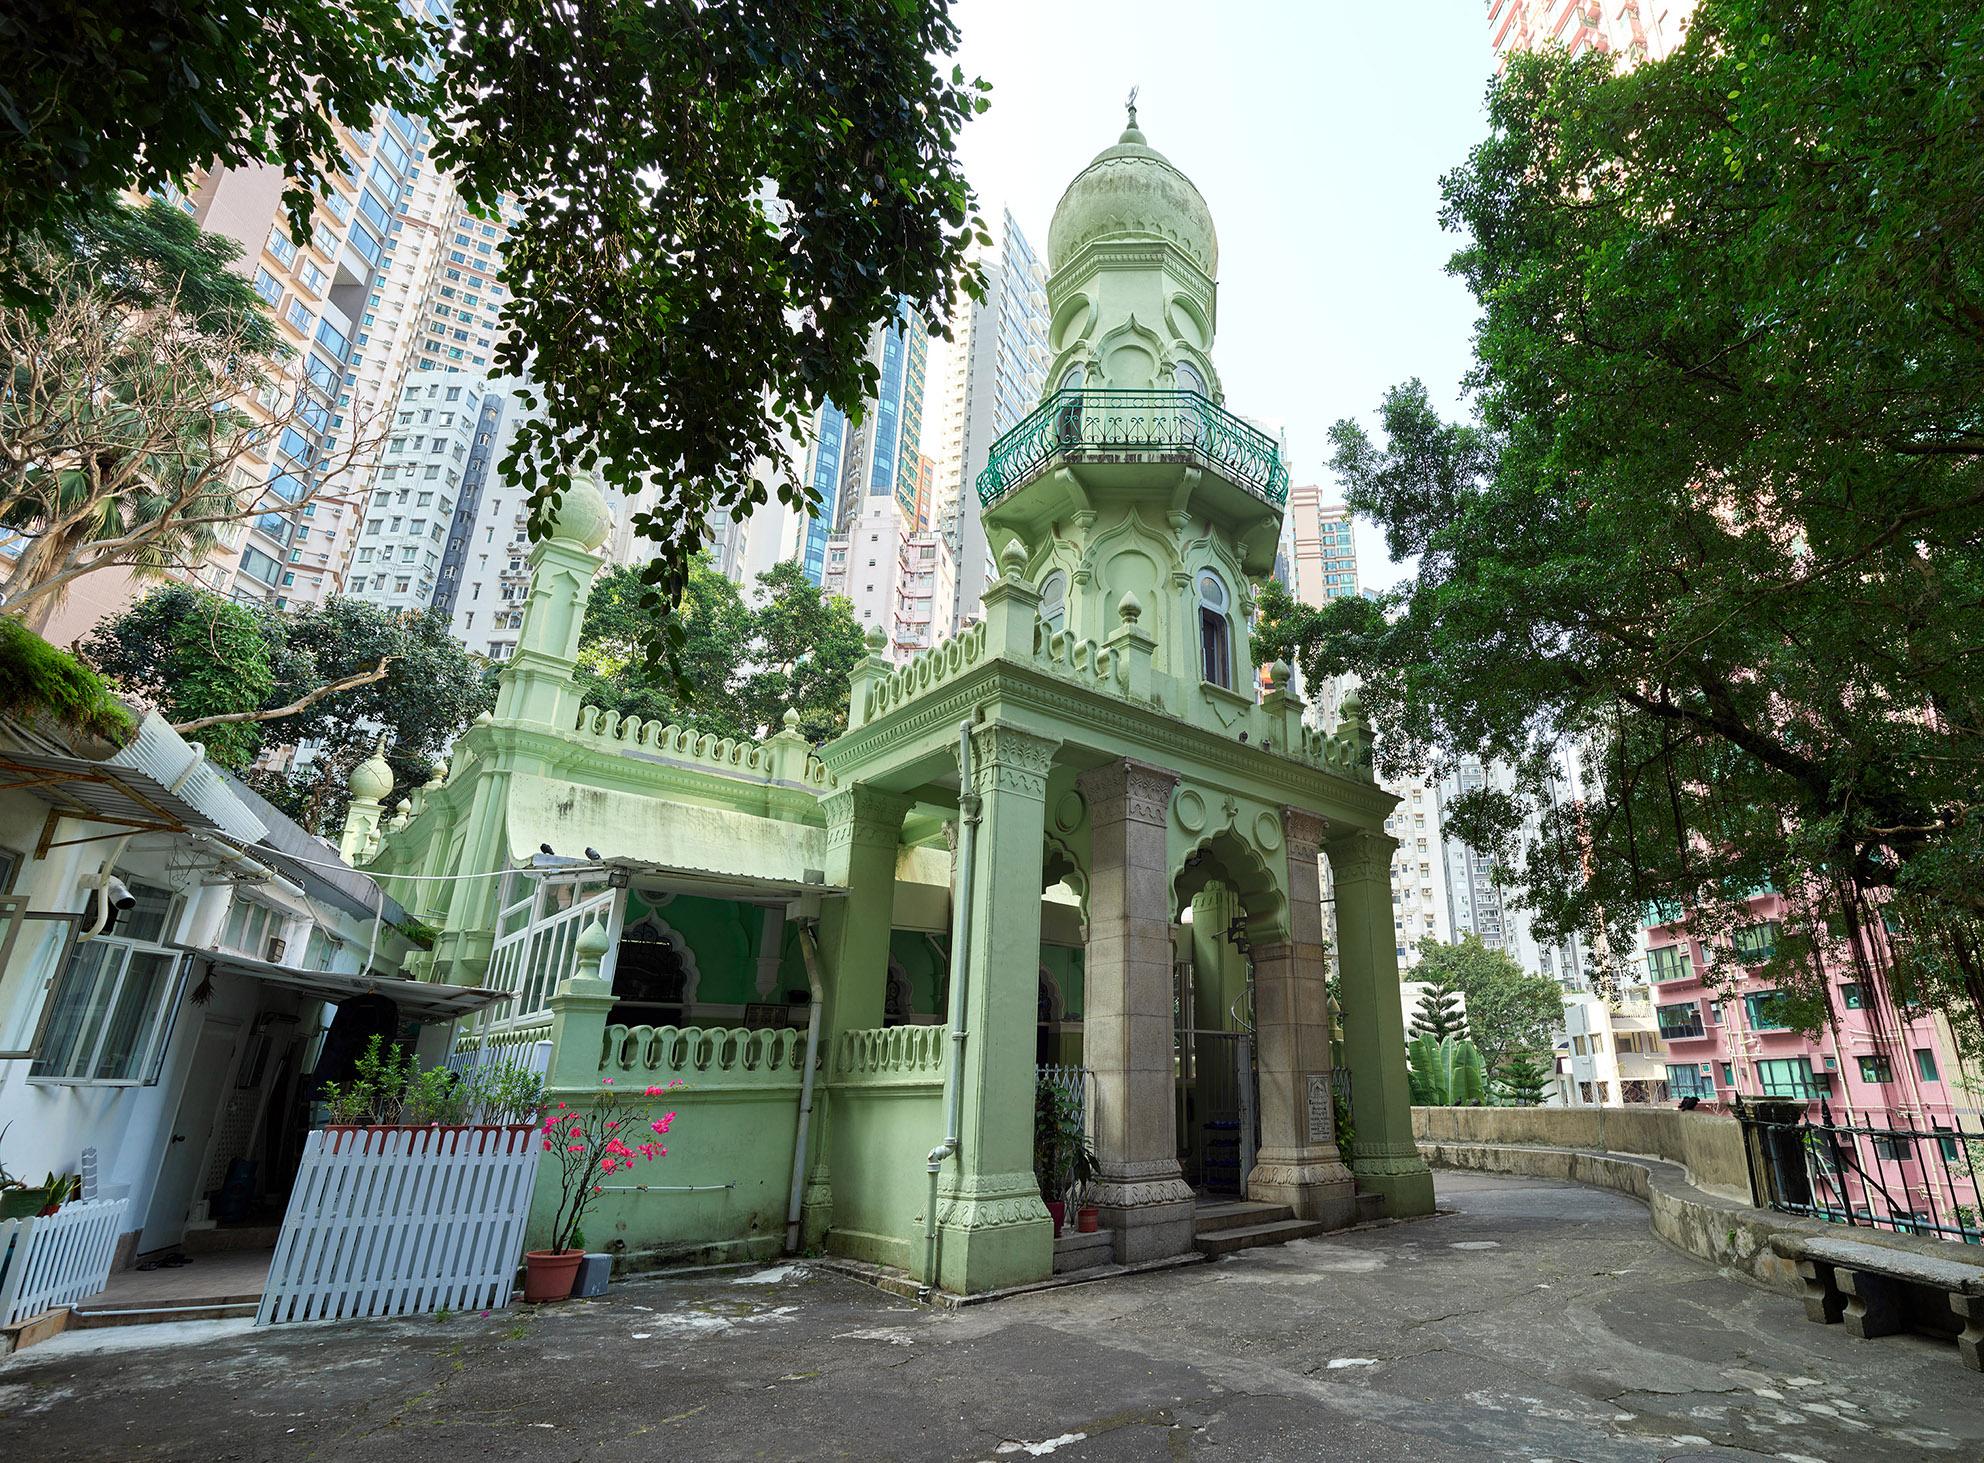 The Government today (May 20) gazetted a notice announcing that the Antiquities Authority (i.e. the Secretary for Development) has declared Jamia Mosque and Hong Kong City Hall in Central, and Lui Seng Chun in Mong Kok as monuments under the Antiquities and Monuments Ordinance. Photo shows the front façade of Jamia Mosque. The minaret with its balcony is the most prominent feature of Jamia Mosque.